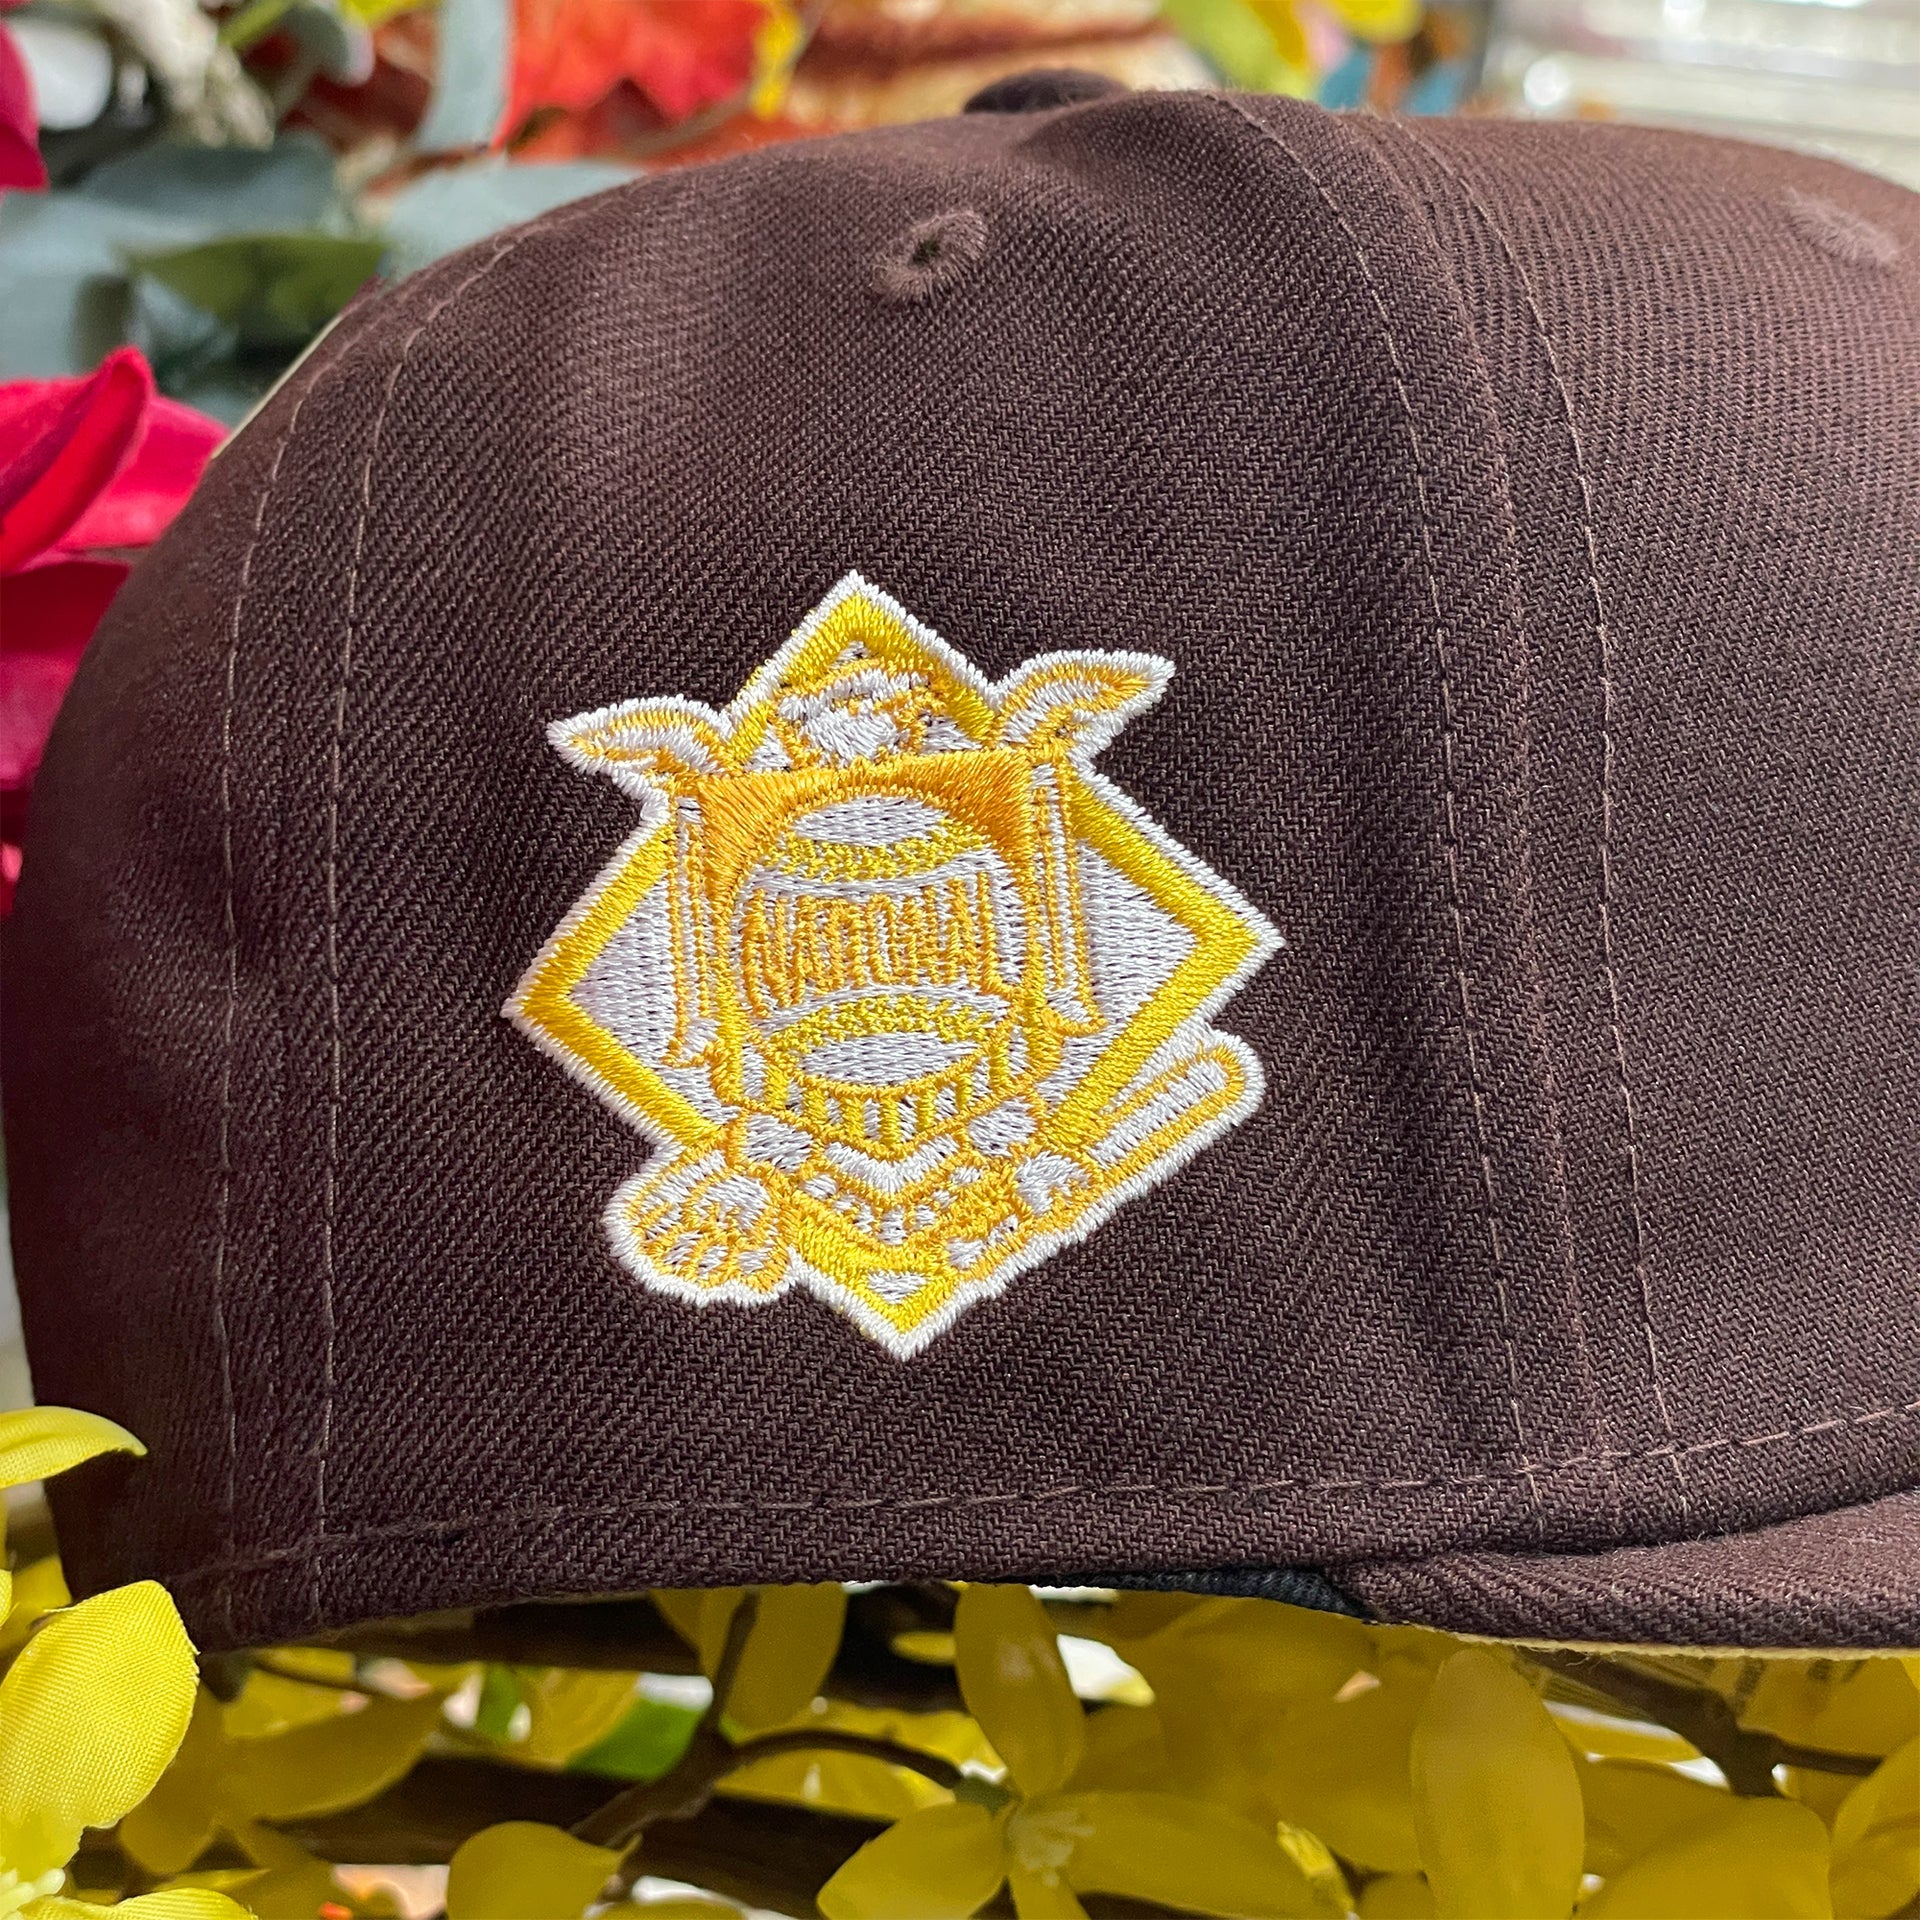 National league side patch on the wearer's right of the San Diego Padres Side Patch Bloom Walnut 59Fifty Fitted Cap | Padres Floral 5950 Fitted